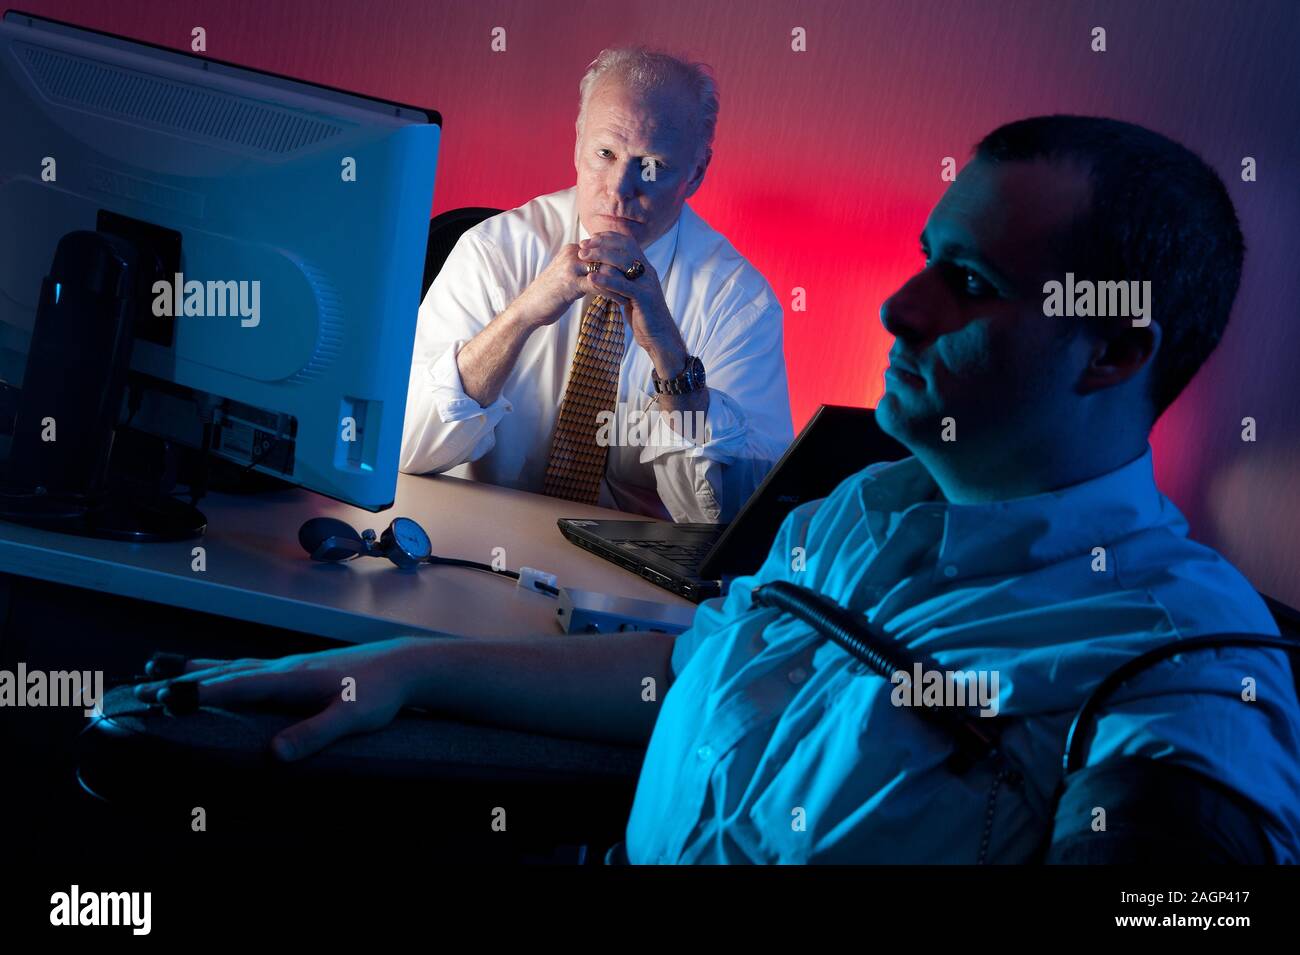 A polygraph examiner interviews a subject. A polygraph, popularly referred to as a lie detector test, is a device or procedure that measures and records several physiological indicators such as blood pressure, pulse, respiration, and skin conductivity while a person is asked and answers a series of questions. Stock Photo